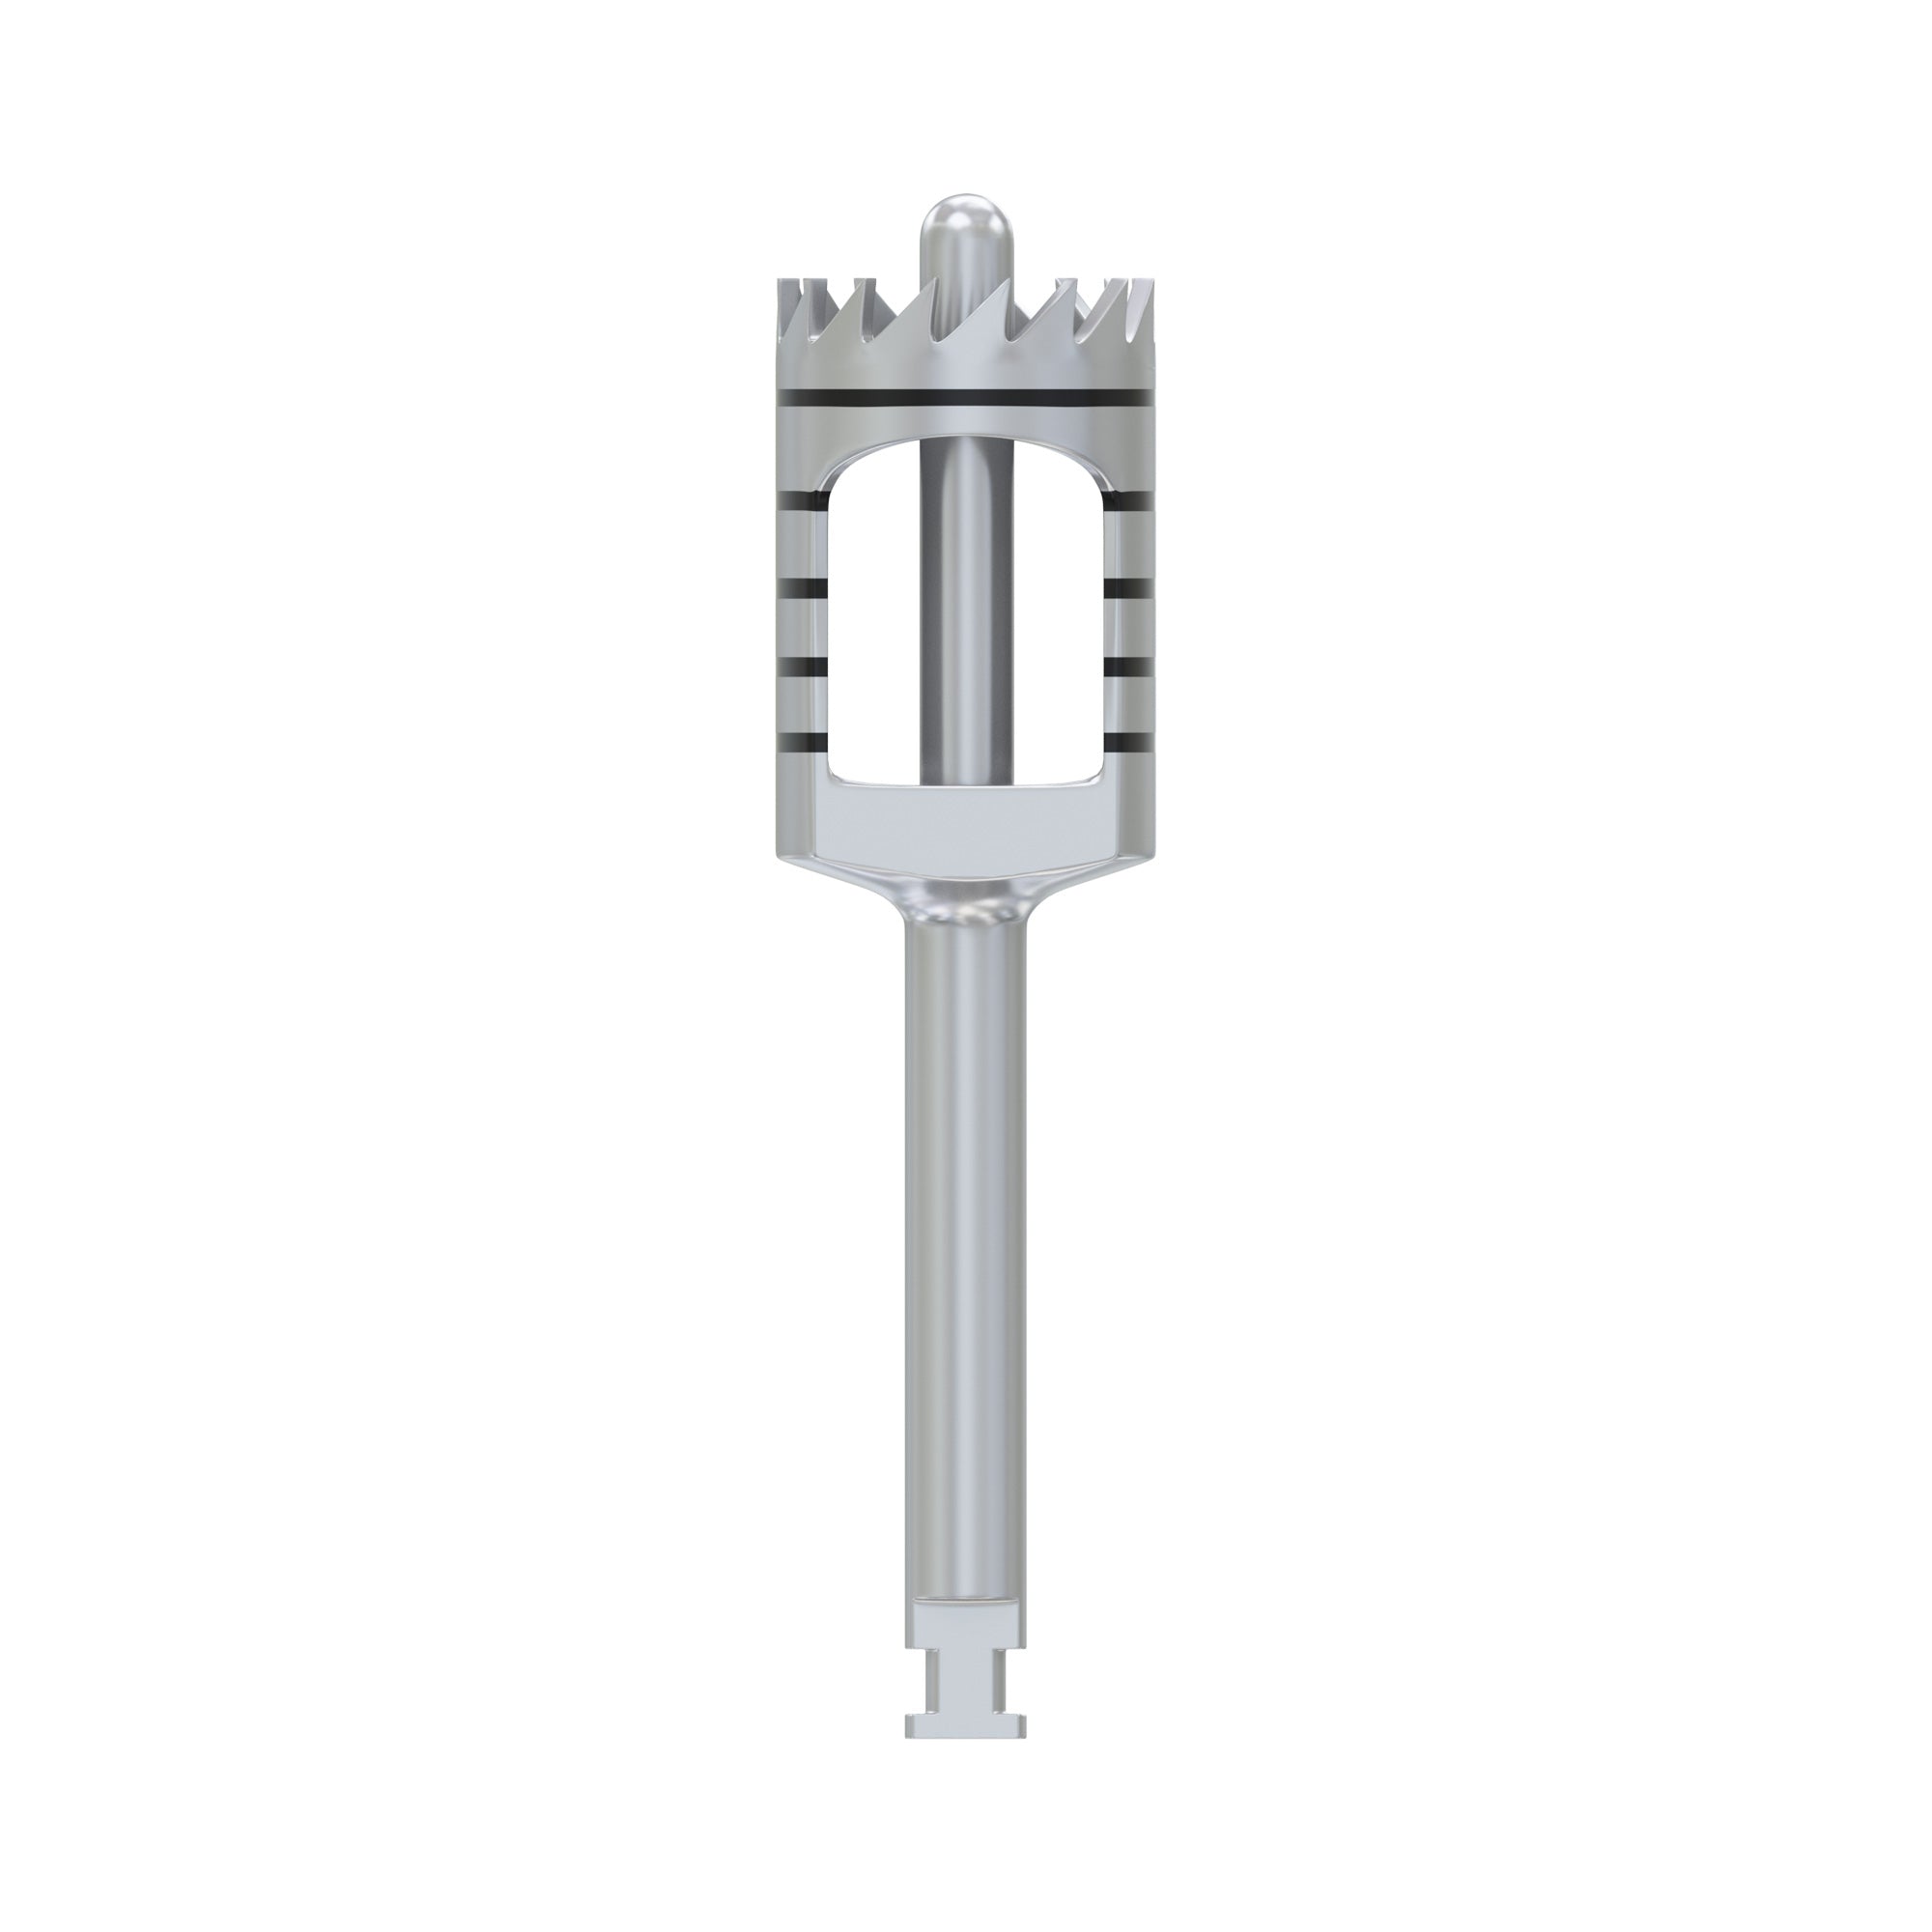 DSI Trephine Drill With Central Pin - For Bone Ring